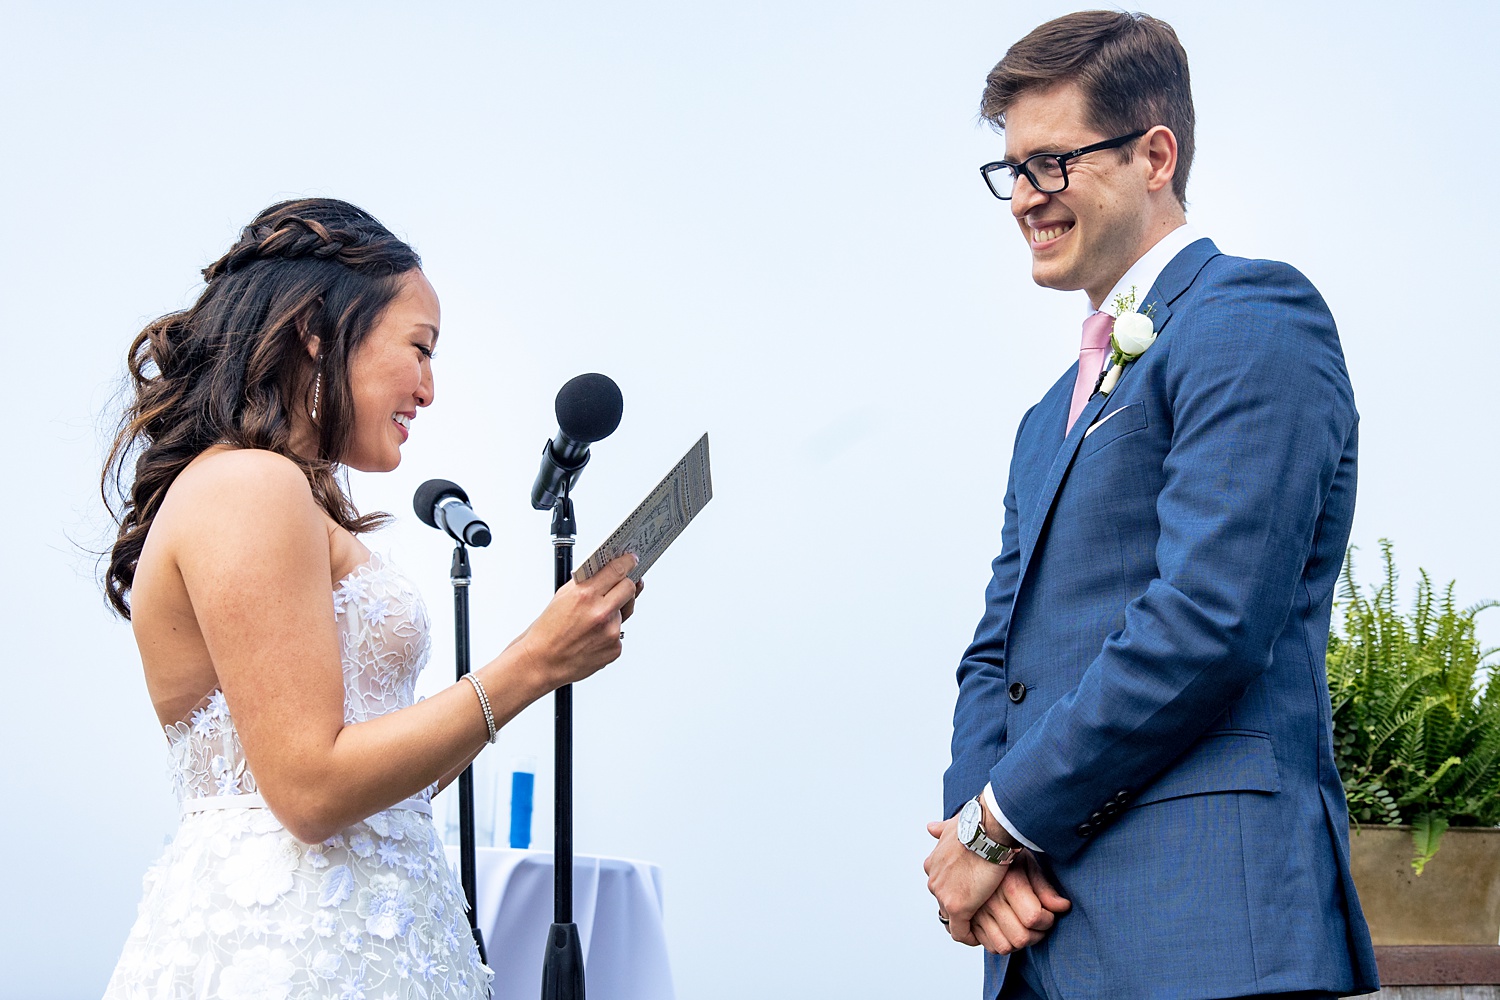 Sharing a moment of smiles during the reading of the vows